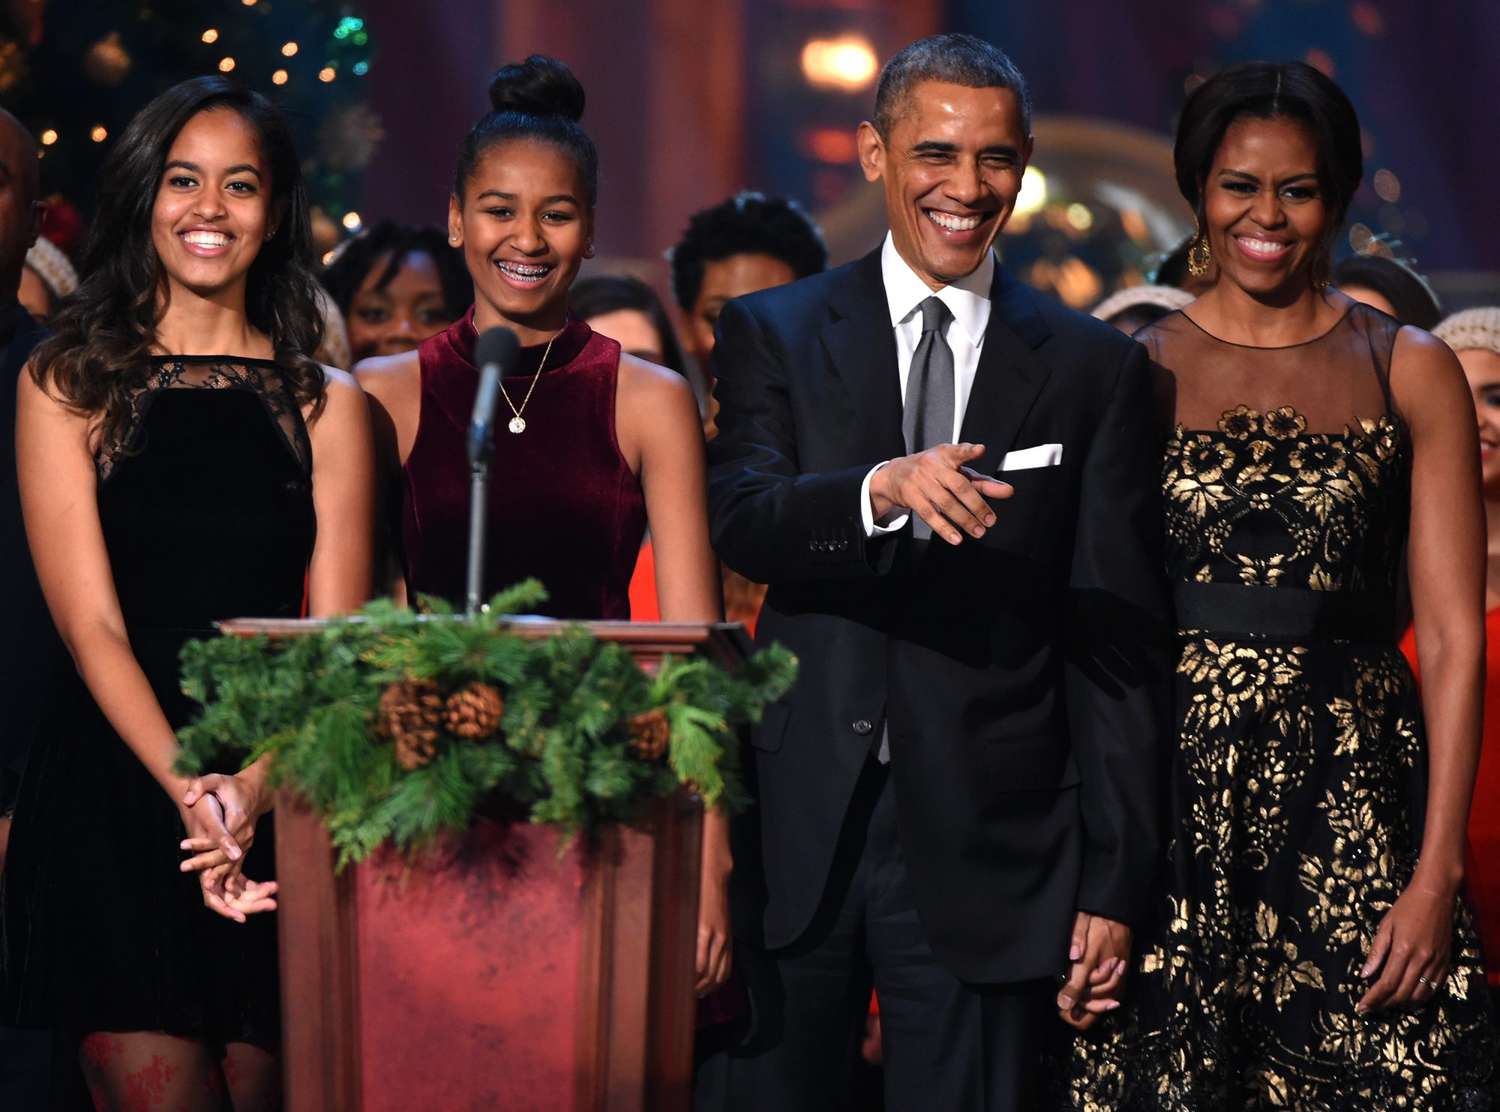 An image of the Obama family.